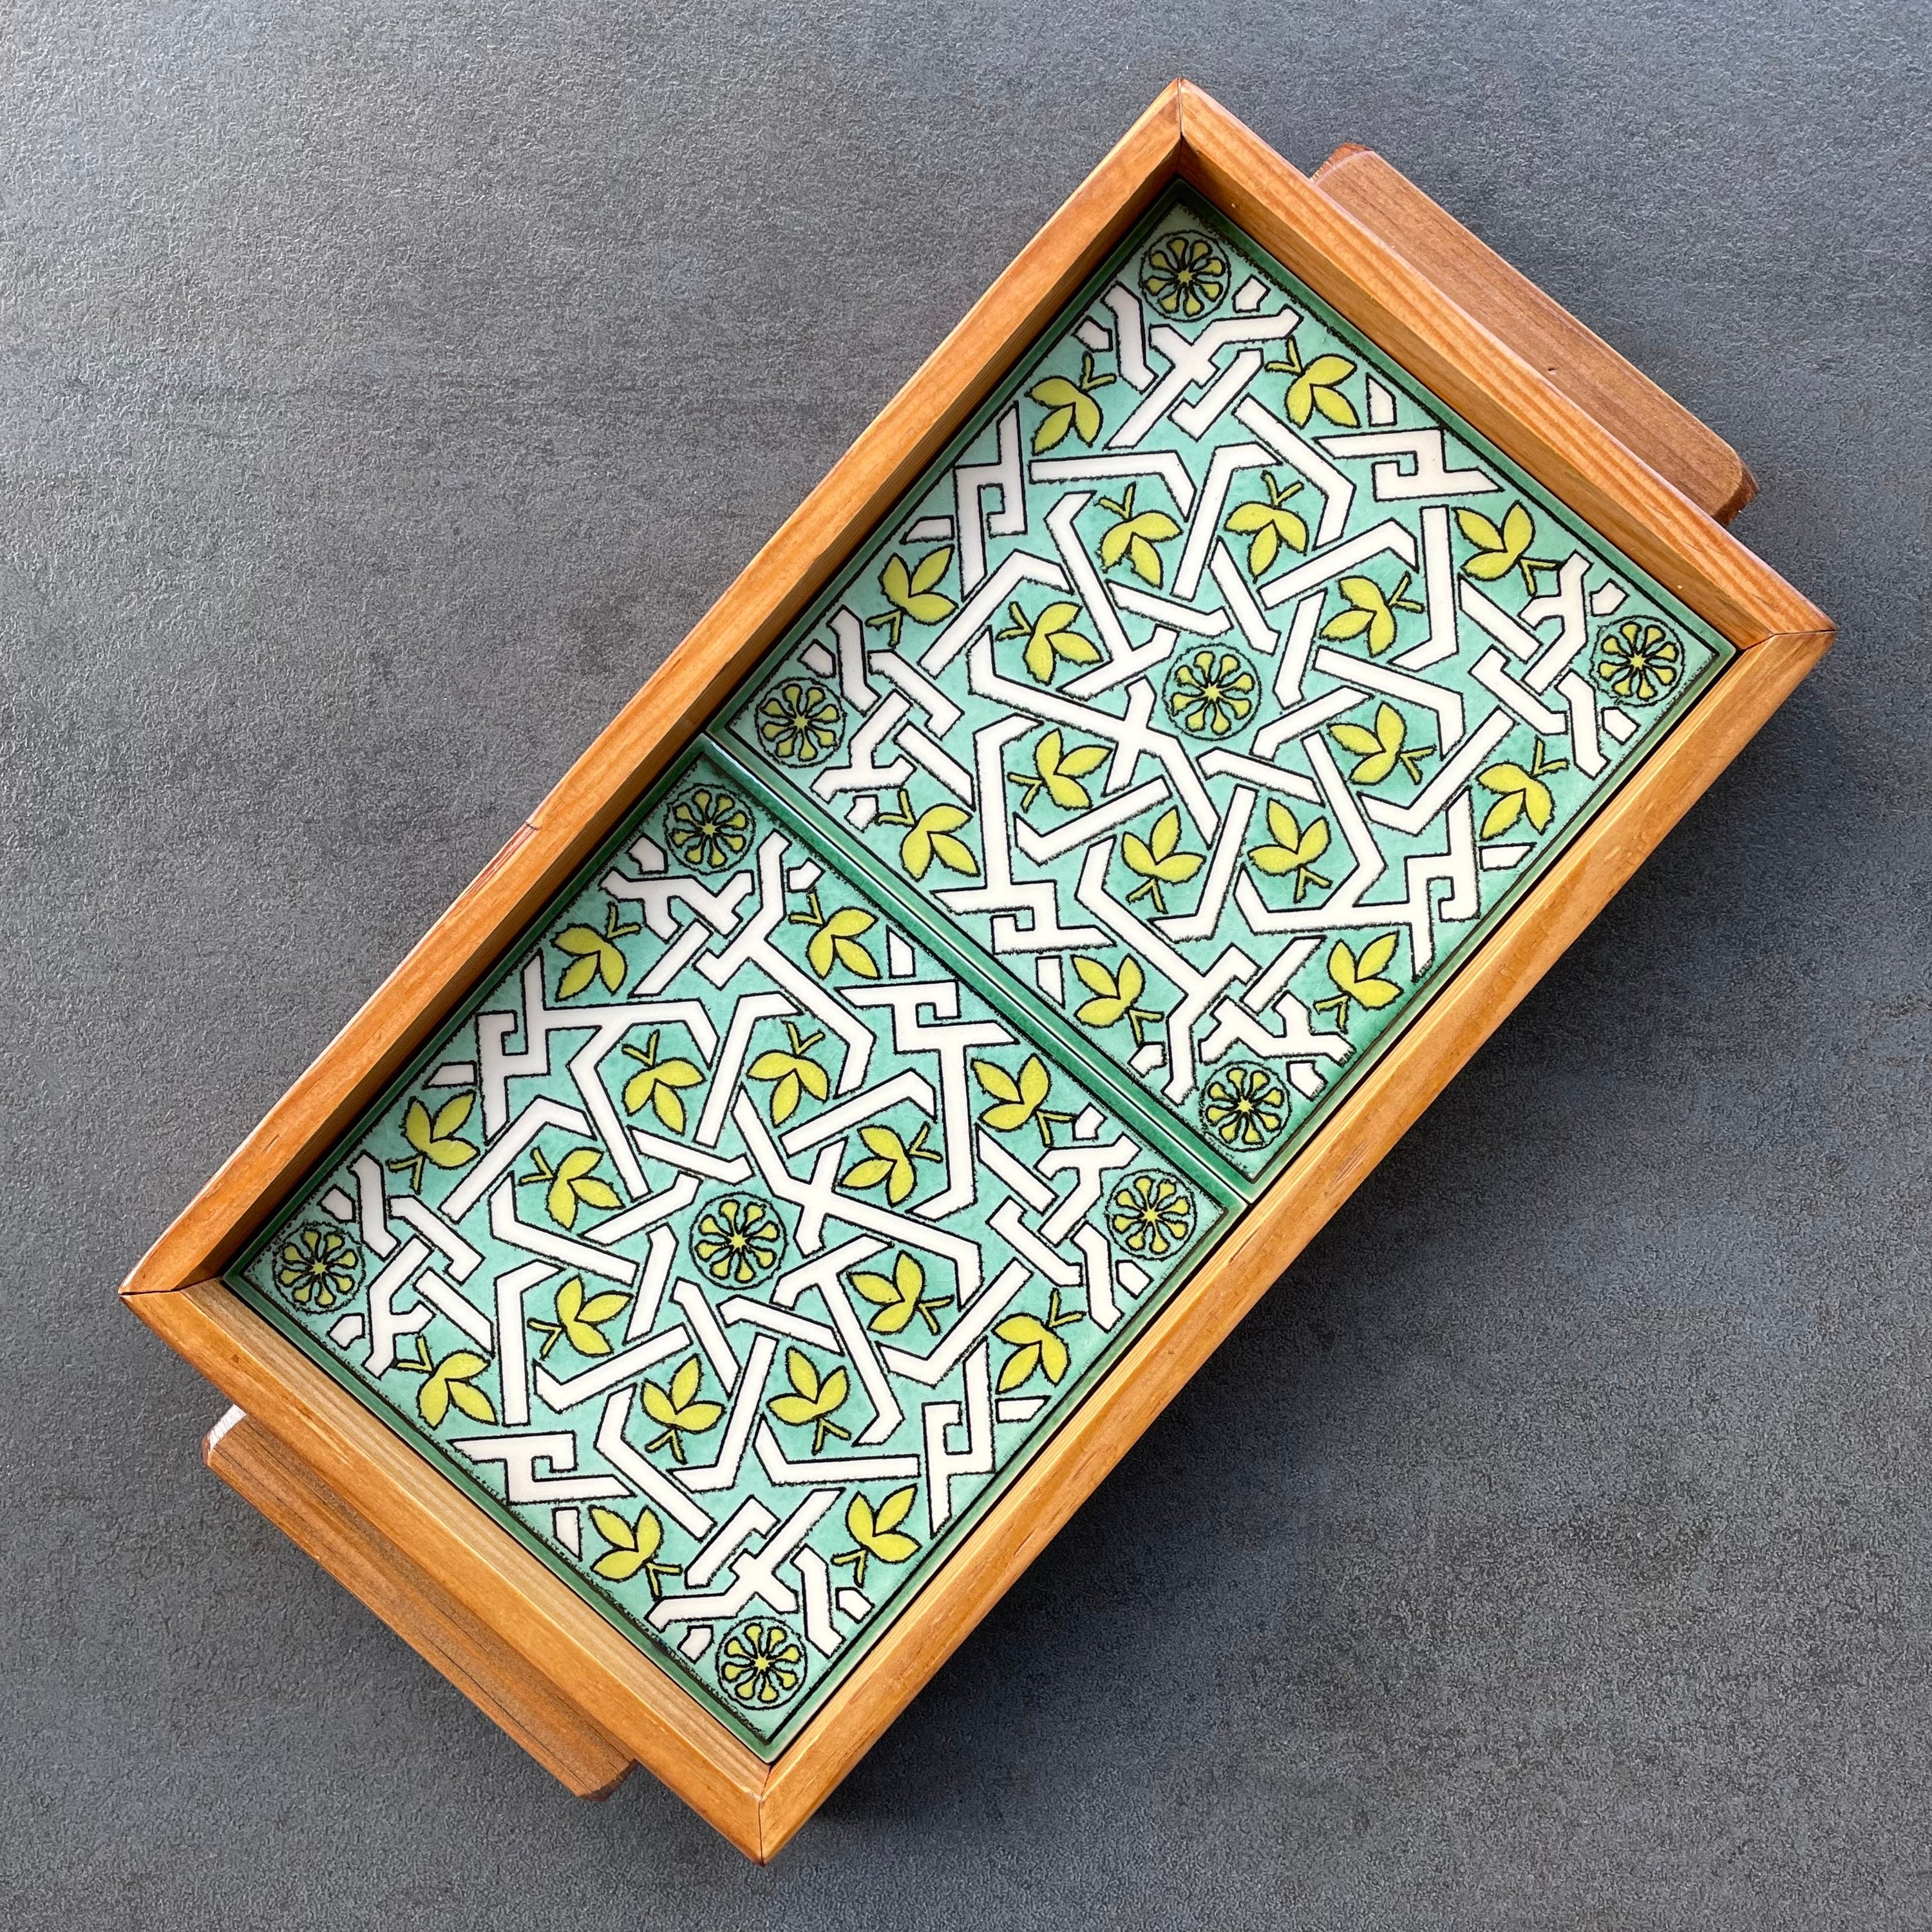 Wooden Tray With Turquoise Ceramic Tiles in Boho Style - Etsy